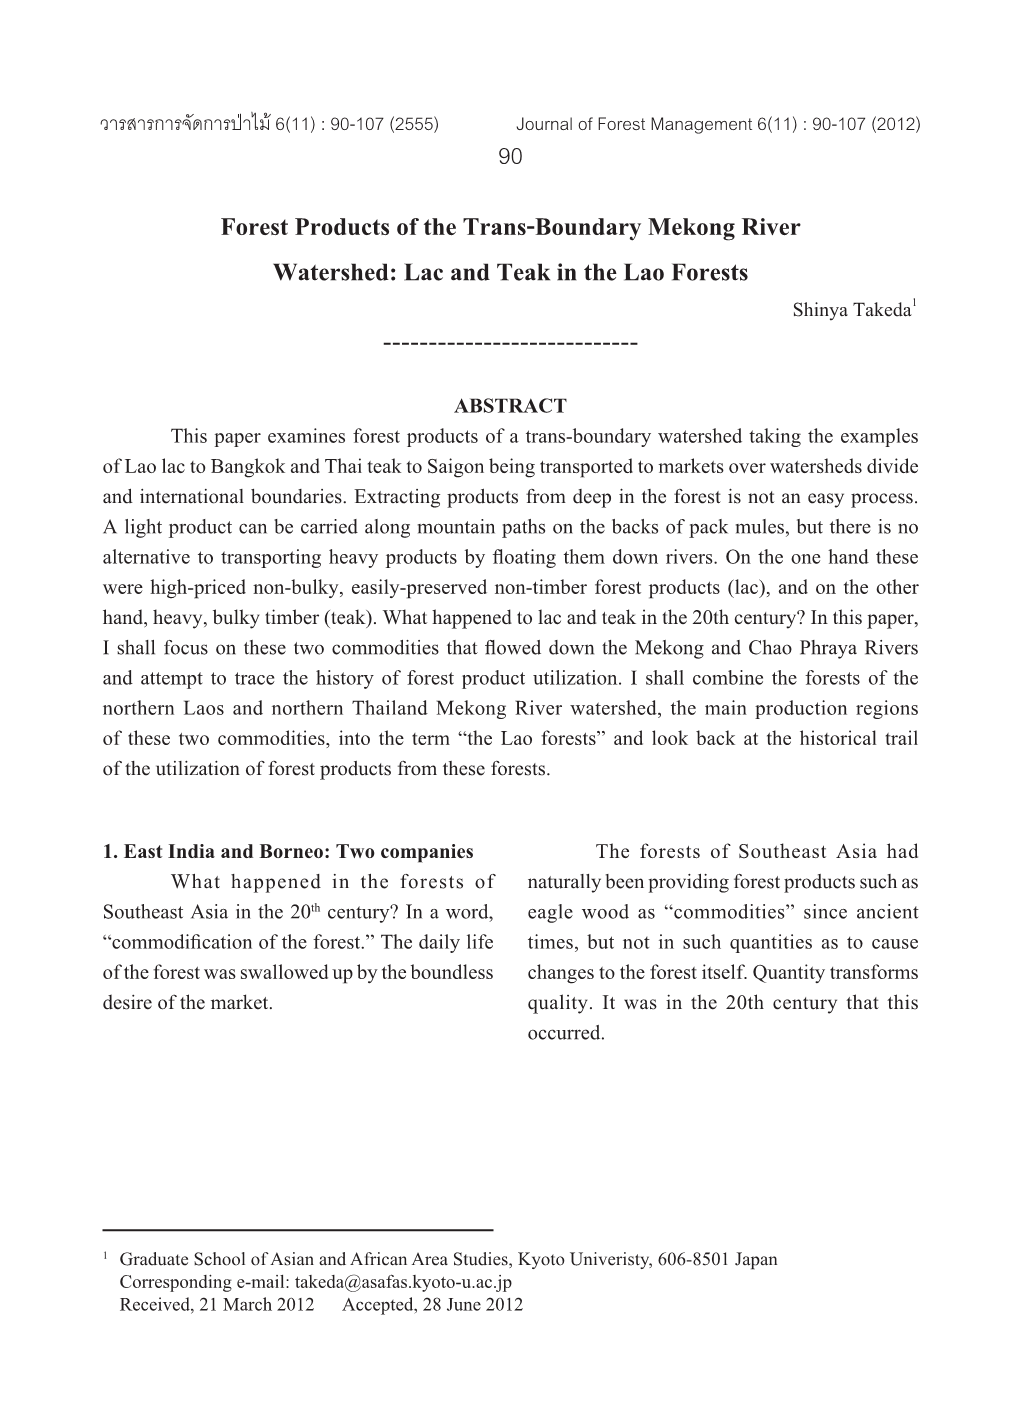 Forest Products of the Trans-Boundary Mekong River Watershed: Lac and Teak in the Lao Forests Shinya Takeda1